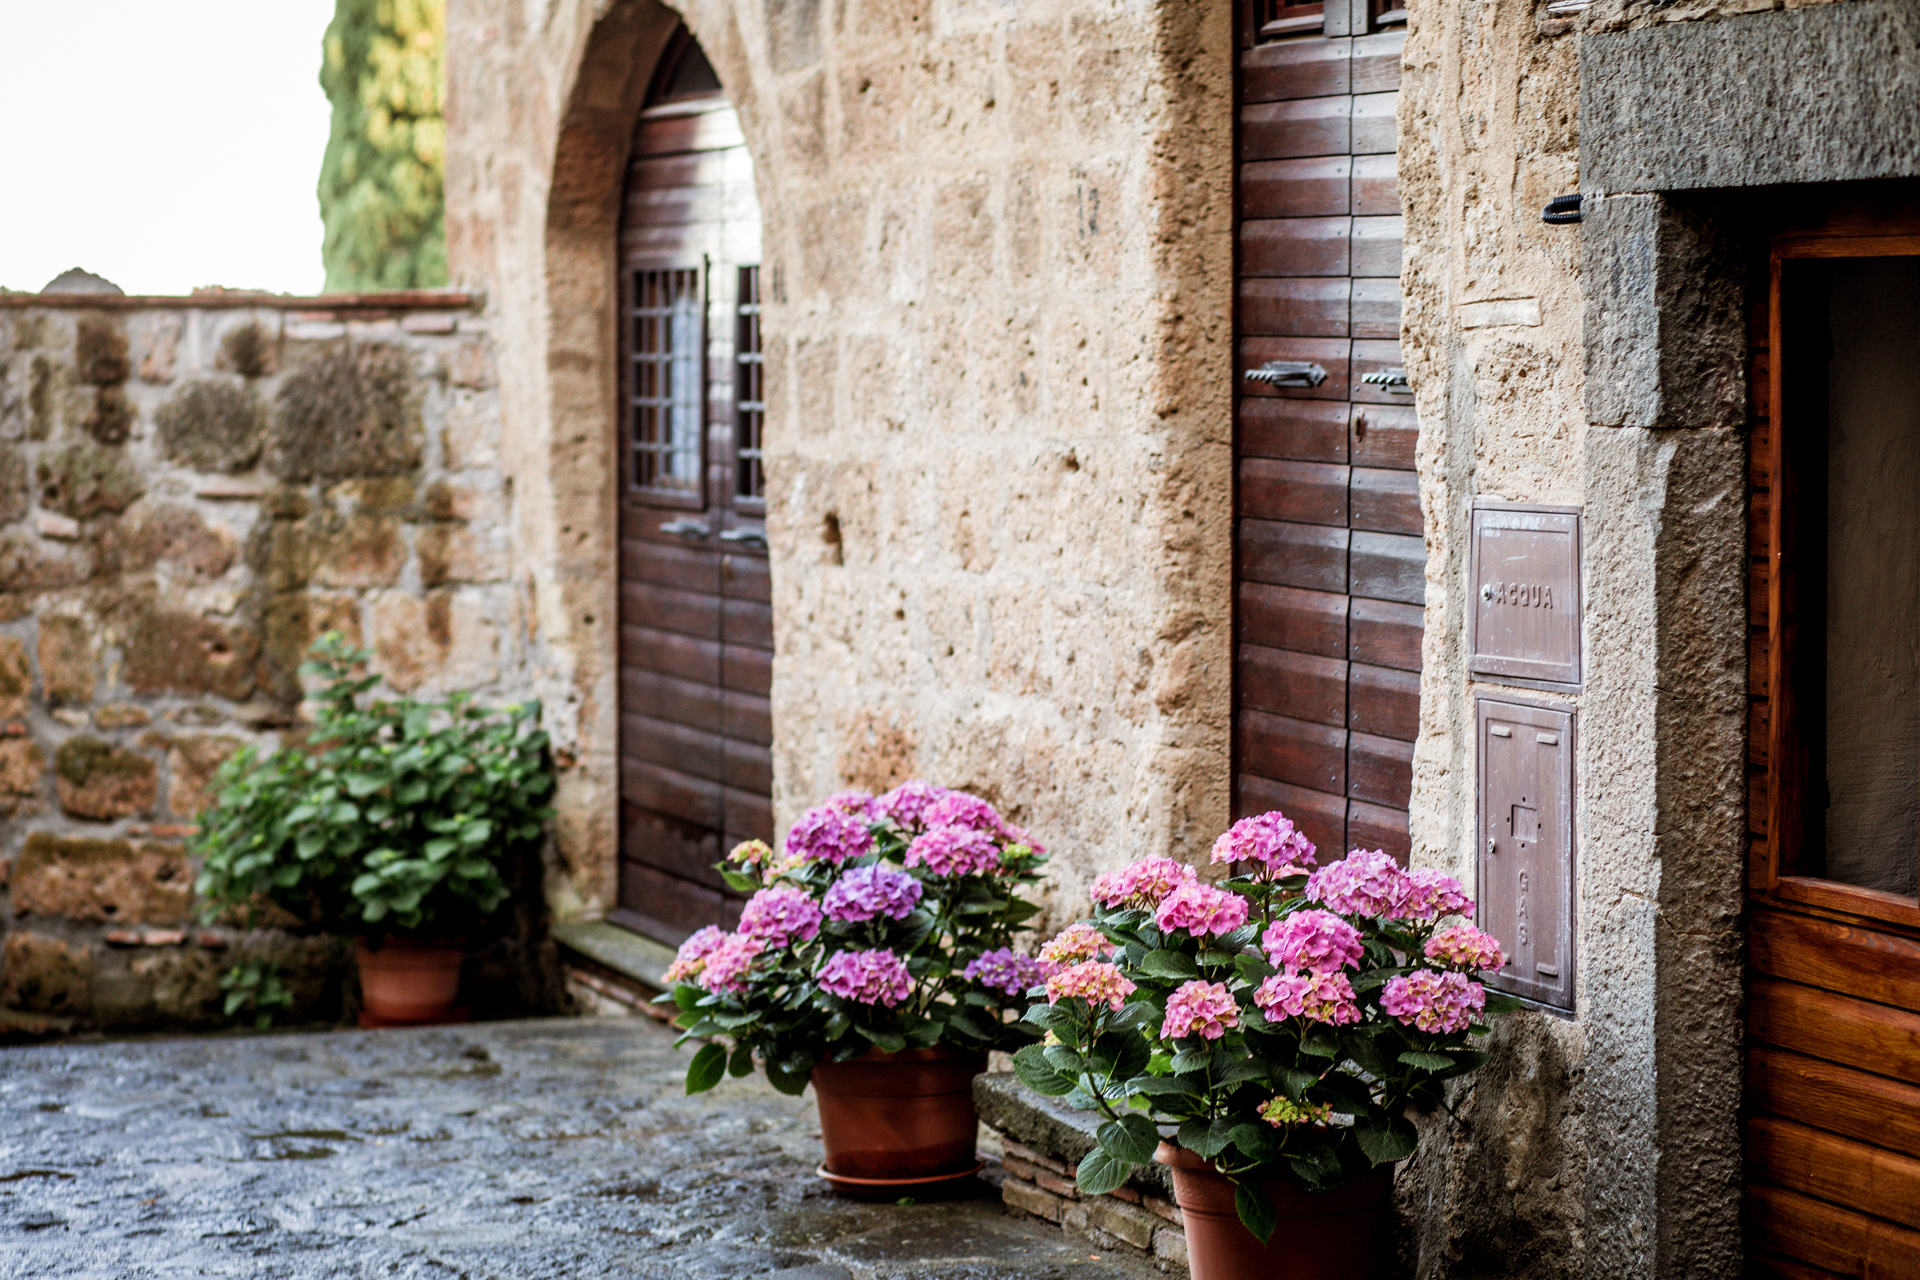 Garden Inspiration: Garden Ideas From Tuscany | Tuscany Garden Ideas by popular New England travel blogger, Shannon Shipman: image of terracotta pots with pink flowers. 